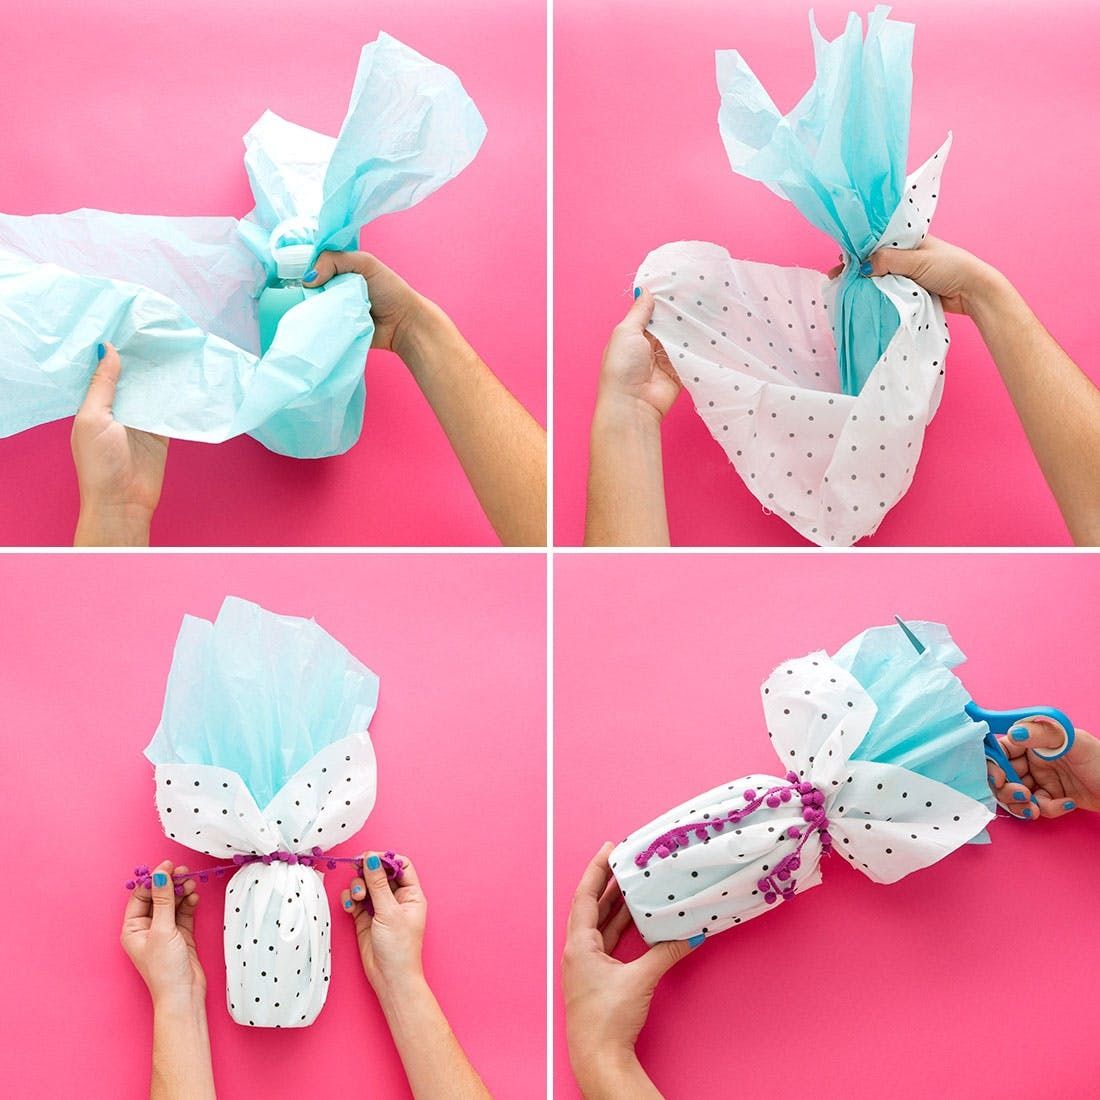 How to Wrap Oddly Shaped Gifts